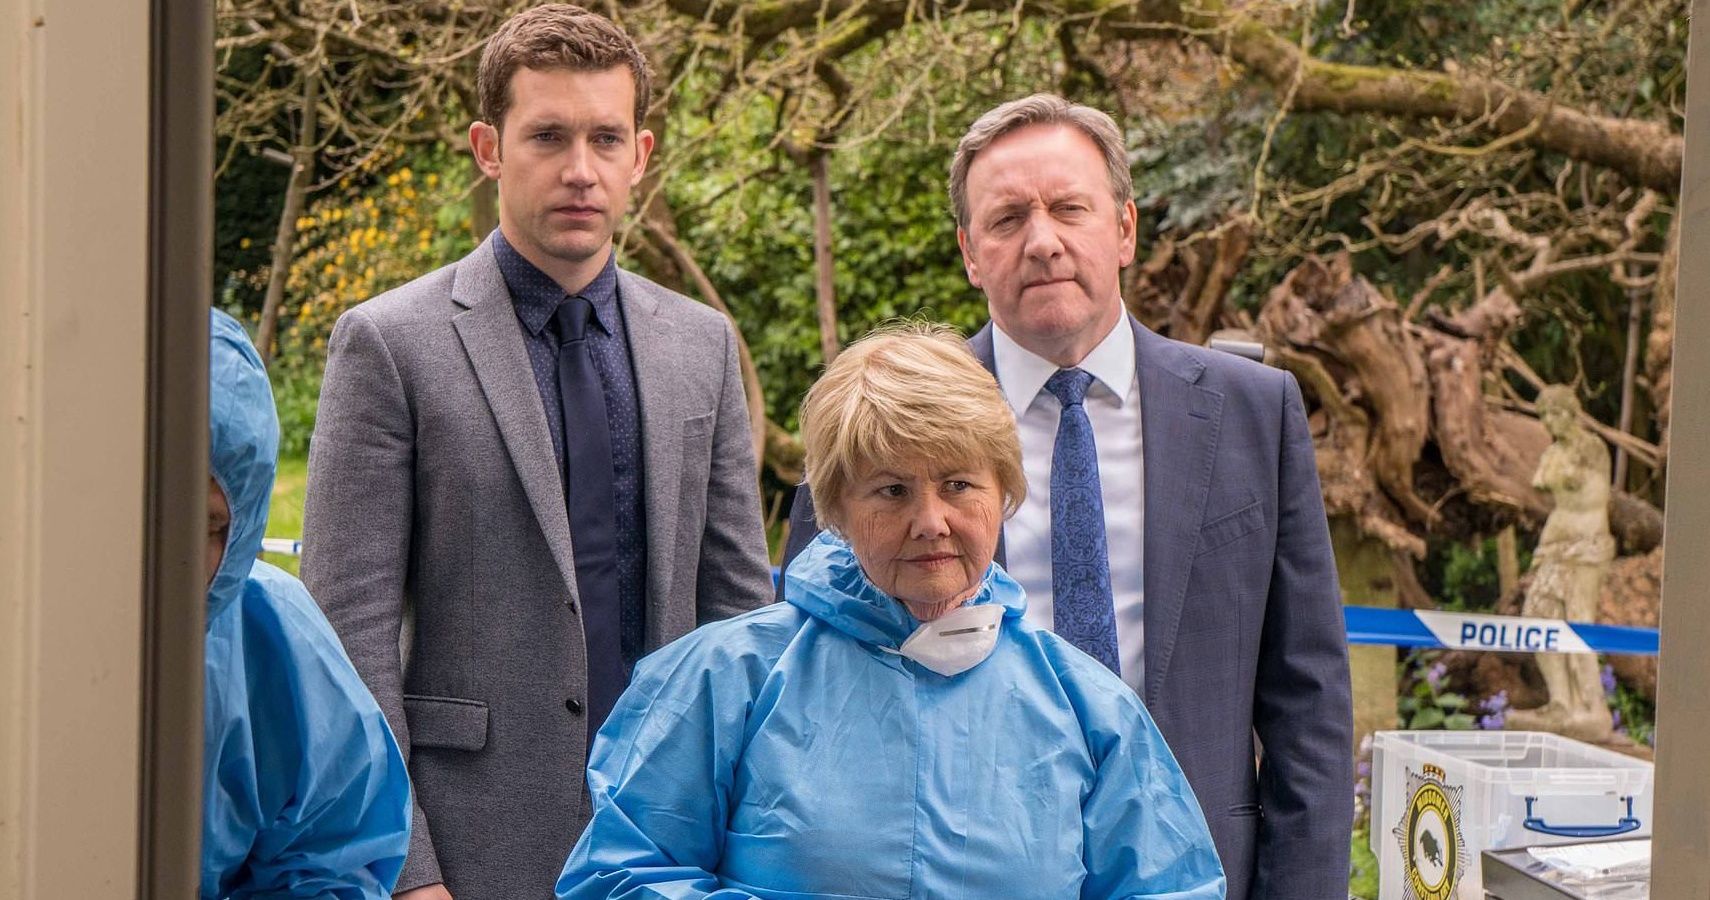 Who Stars In Midsomer Murders In 2020 Series 20 Cast And Guest Stars ...